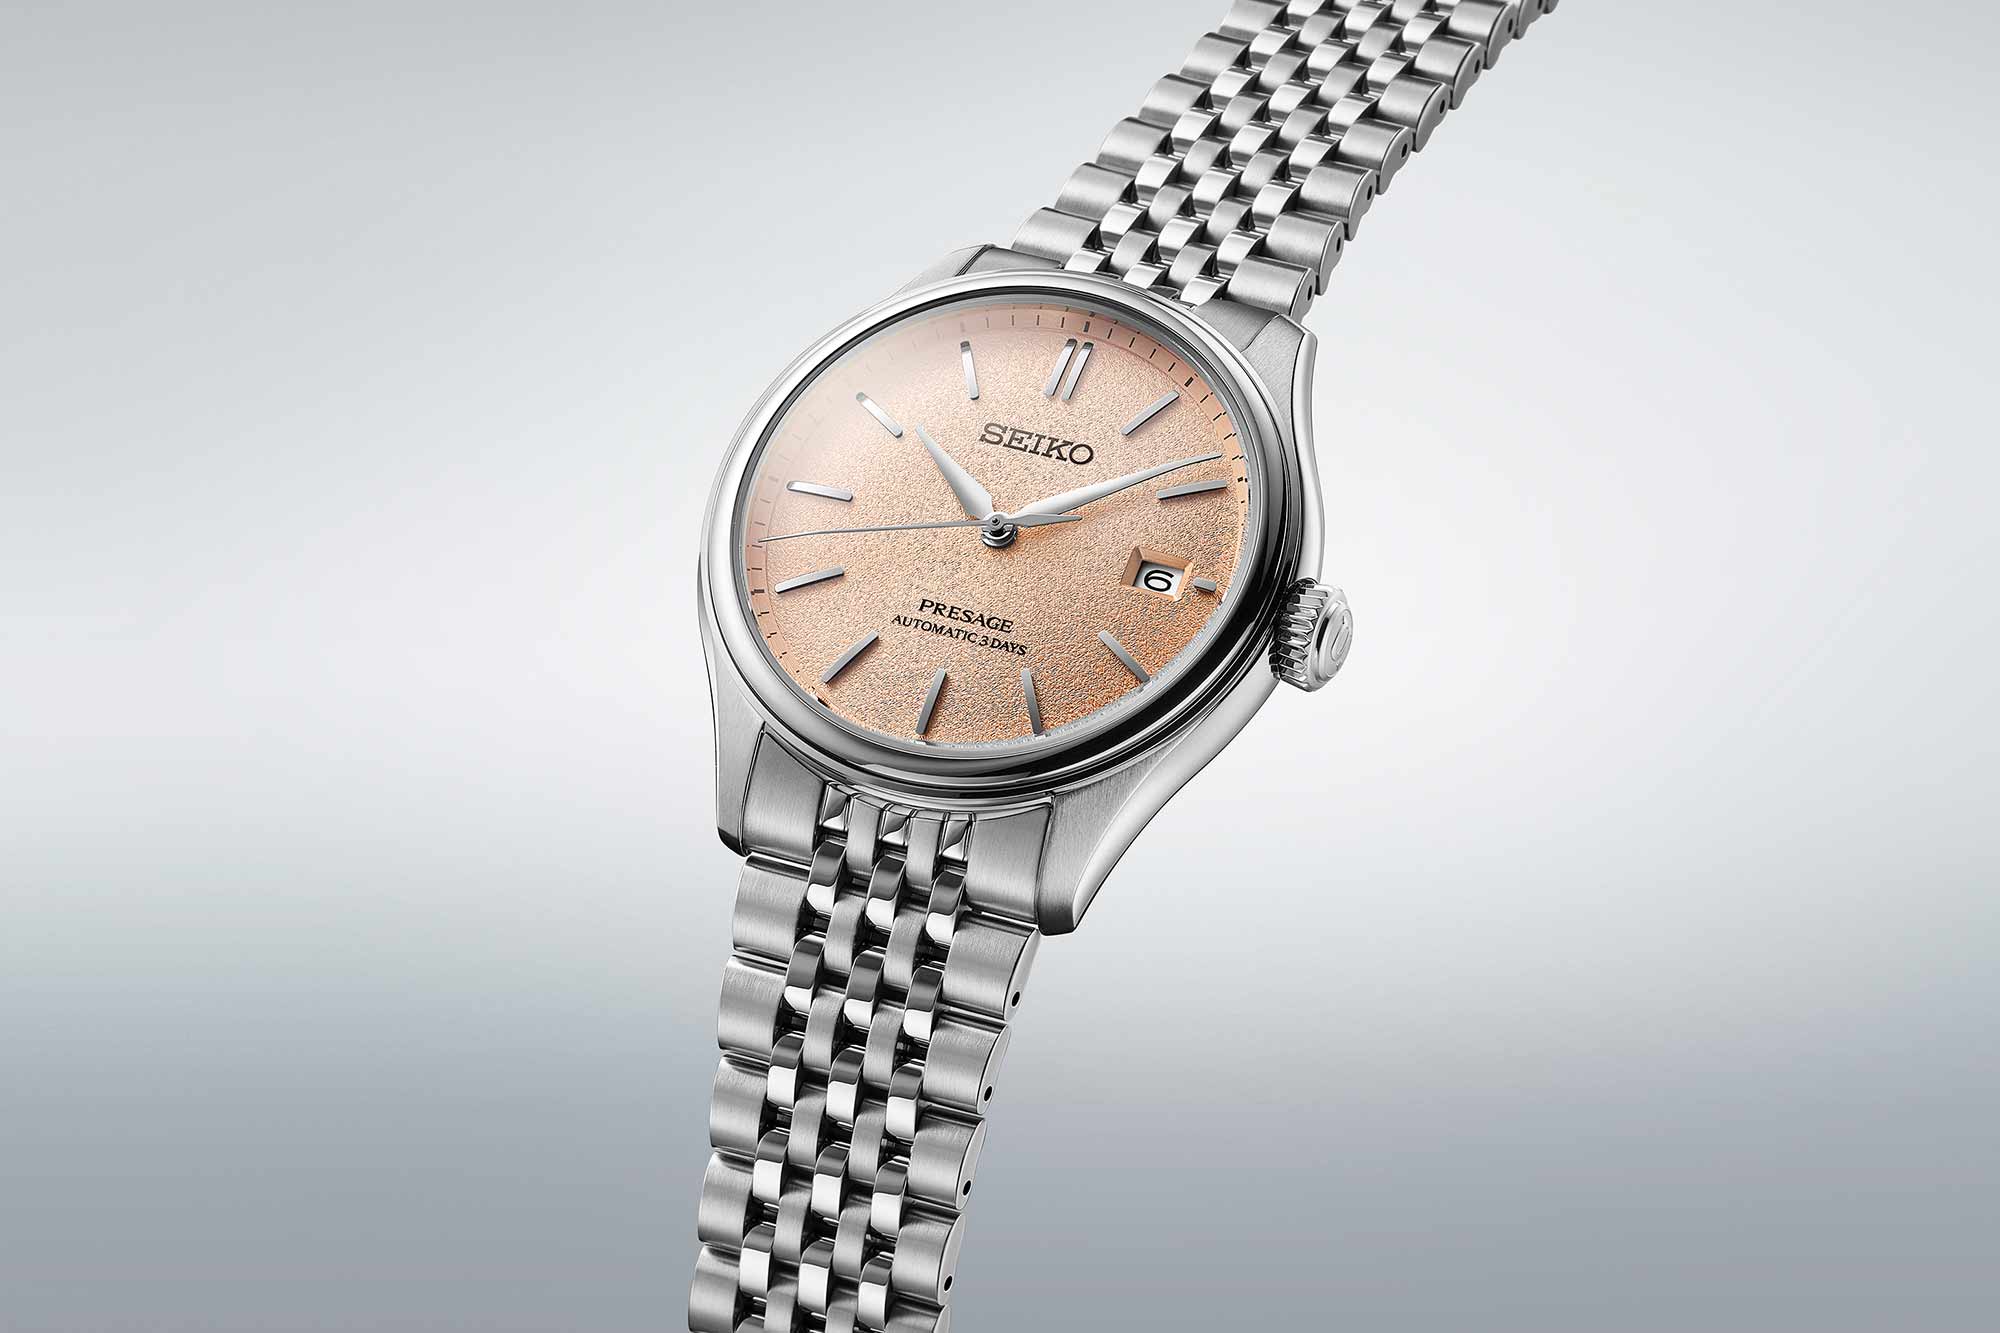 A Quick Look At The New Seiko Presage Classic Series